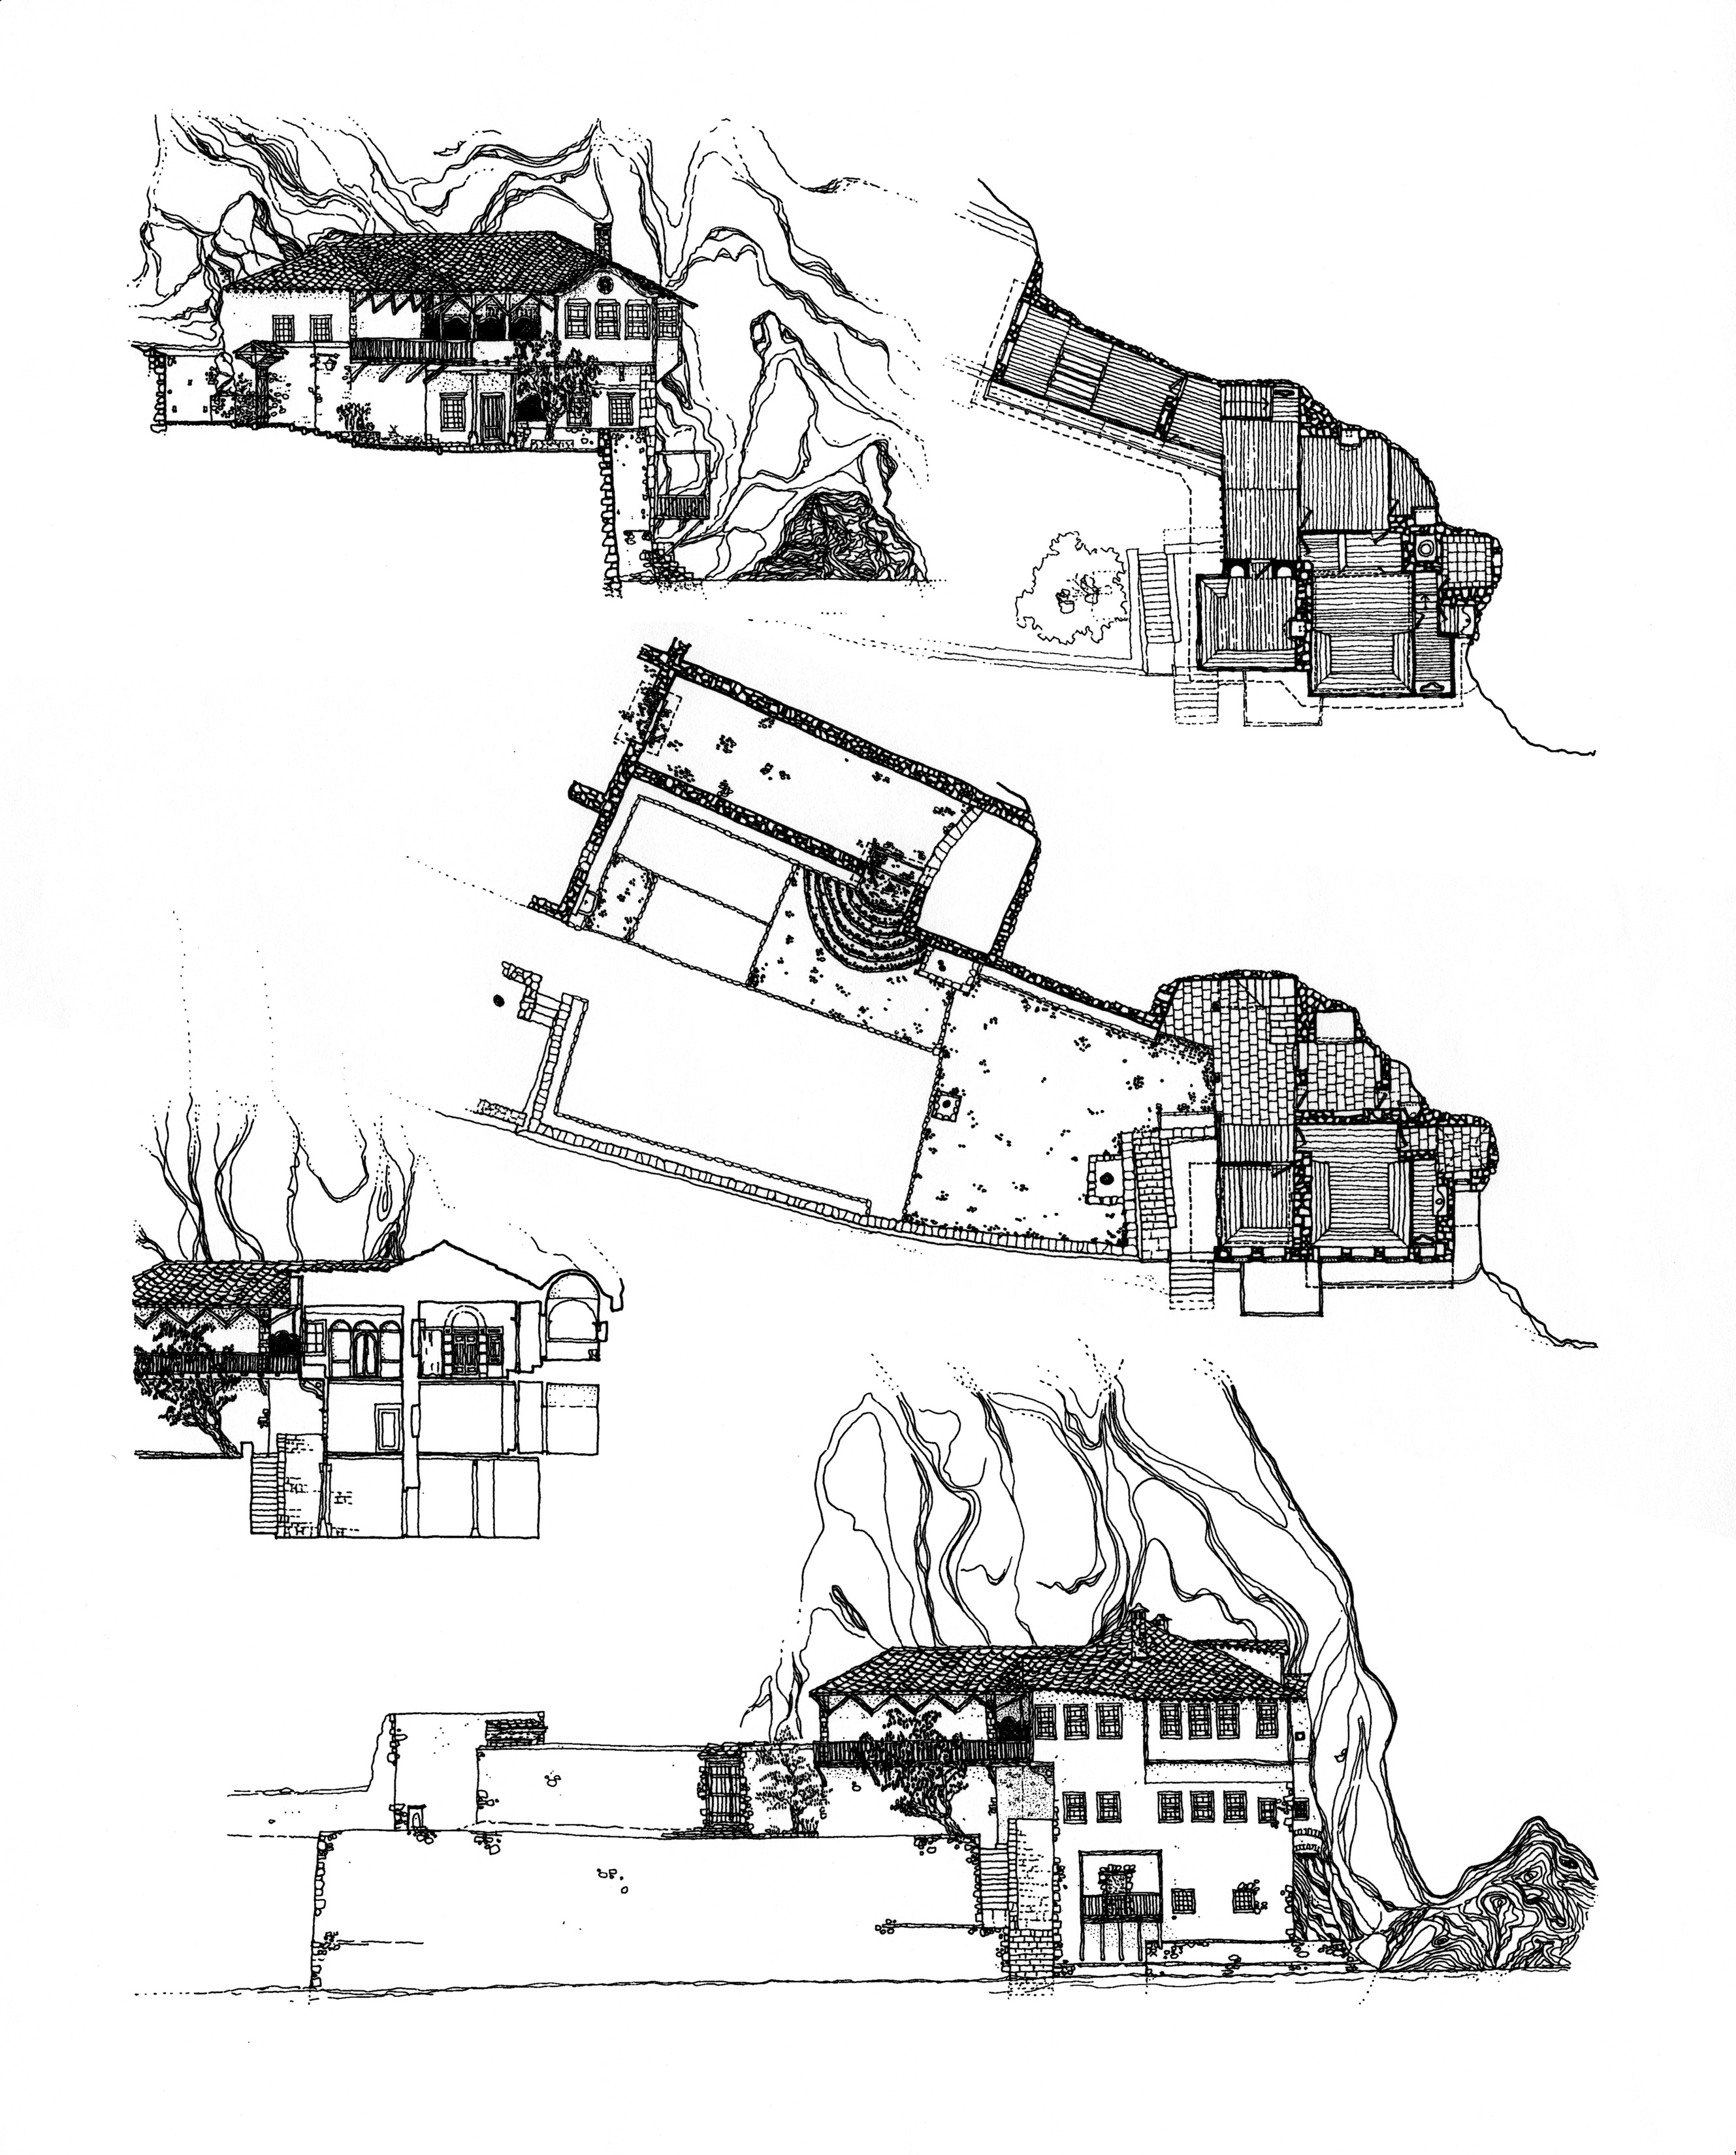 <p>The plan, section, and elevation views of this monastic building show an extraordinary fit between building and site. Finely crafted interior spaces provide ritual, guest and bathing accommodations, and include a mausoleum for a legendary shiekh. Courtyard spaces complete the setting.</p><p>(drawings by authors 1993, data from the multiple sources at Bosnian Preservation Institute, Sarajevo and Mostar)</p>